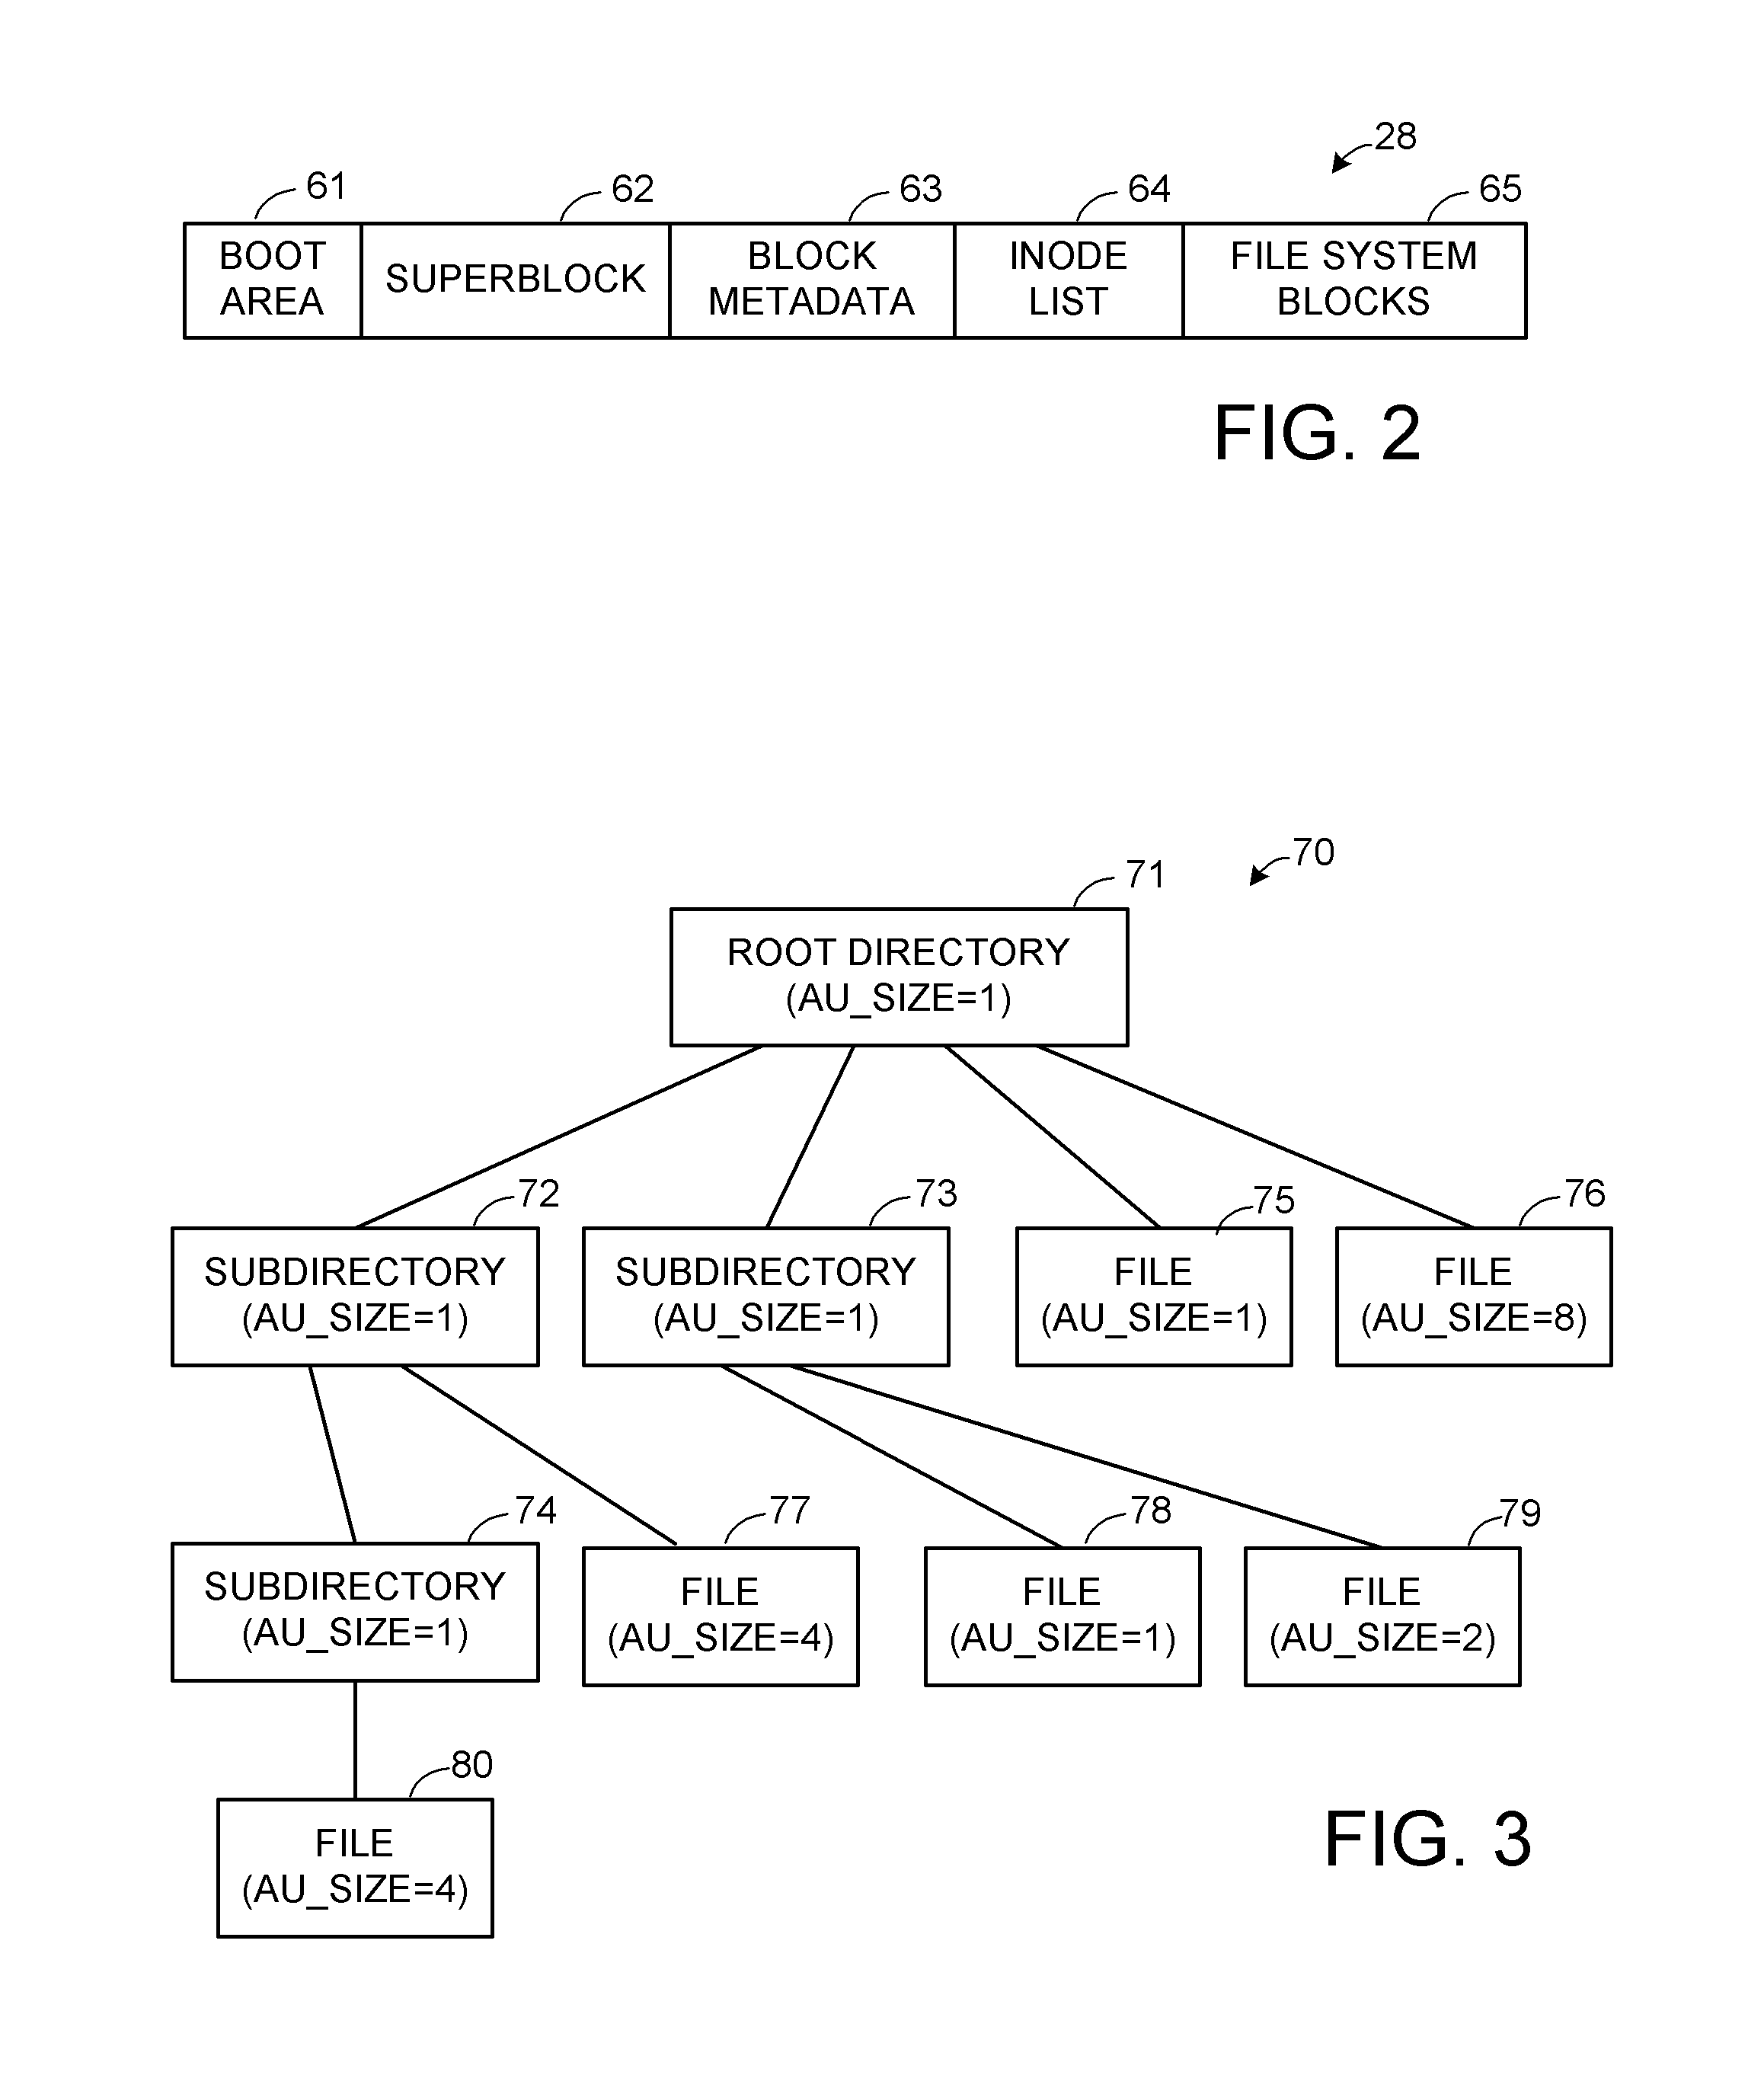 Extent of data blocks as an allocation unit in a unix-based file system